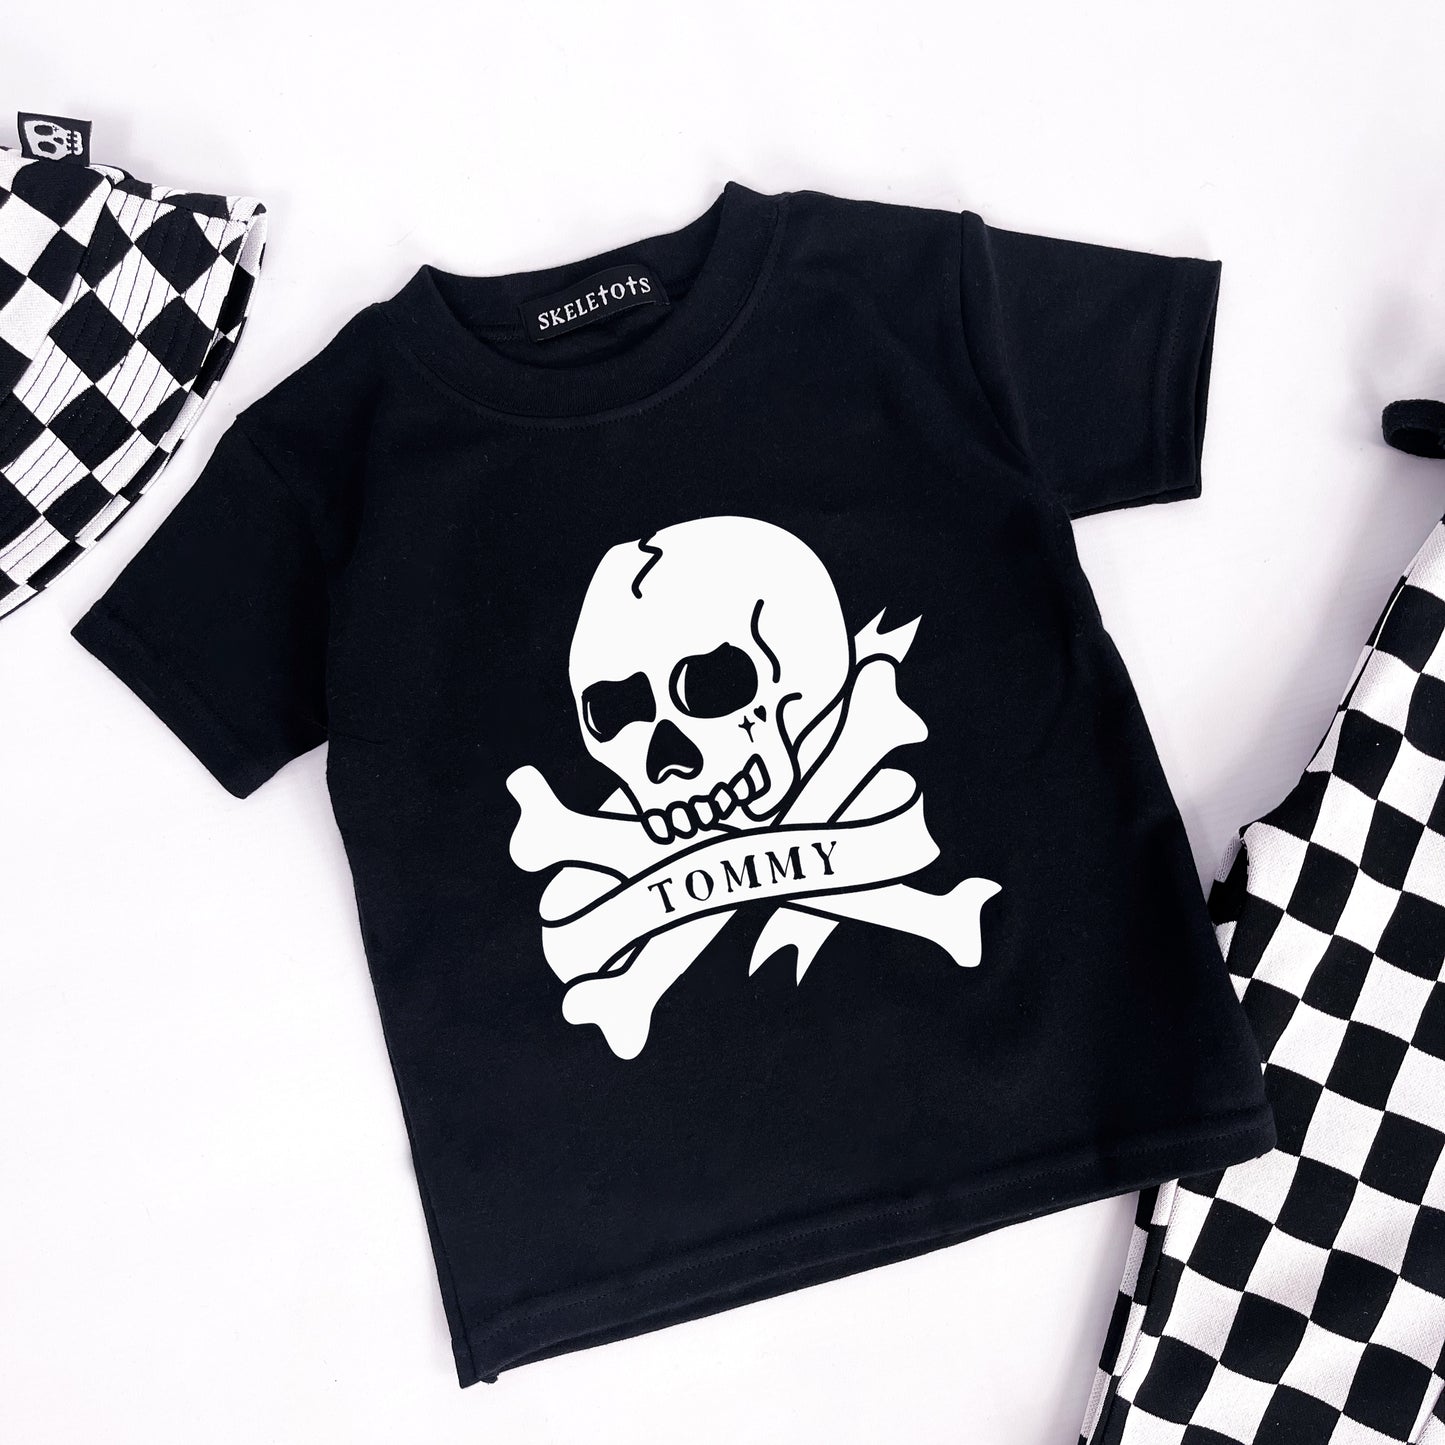 Personalised kids t shirt with tattoo style skull and custom name printing